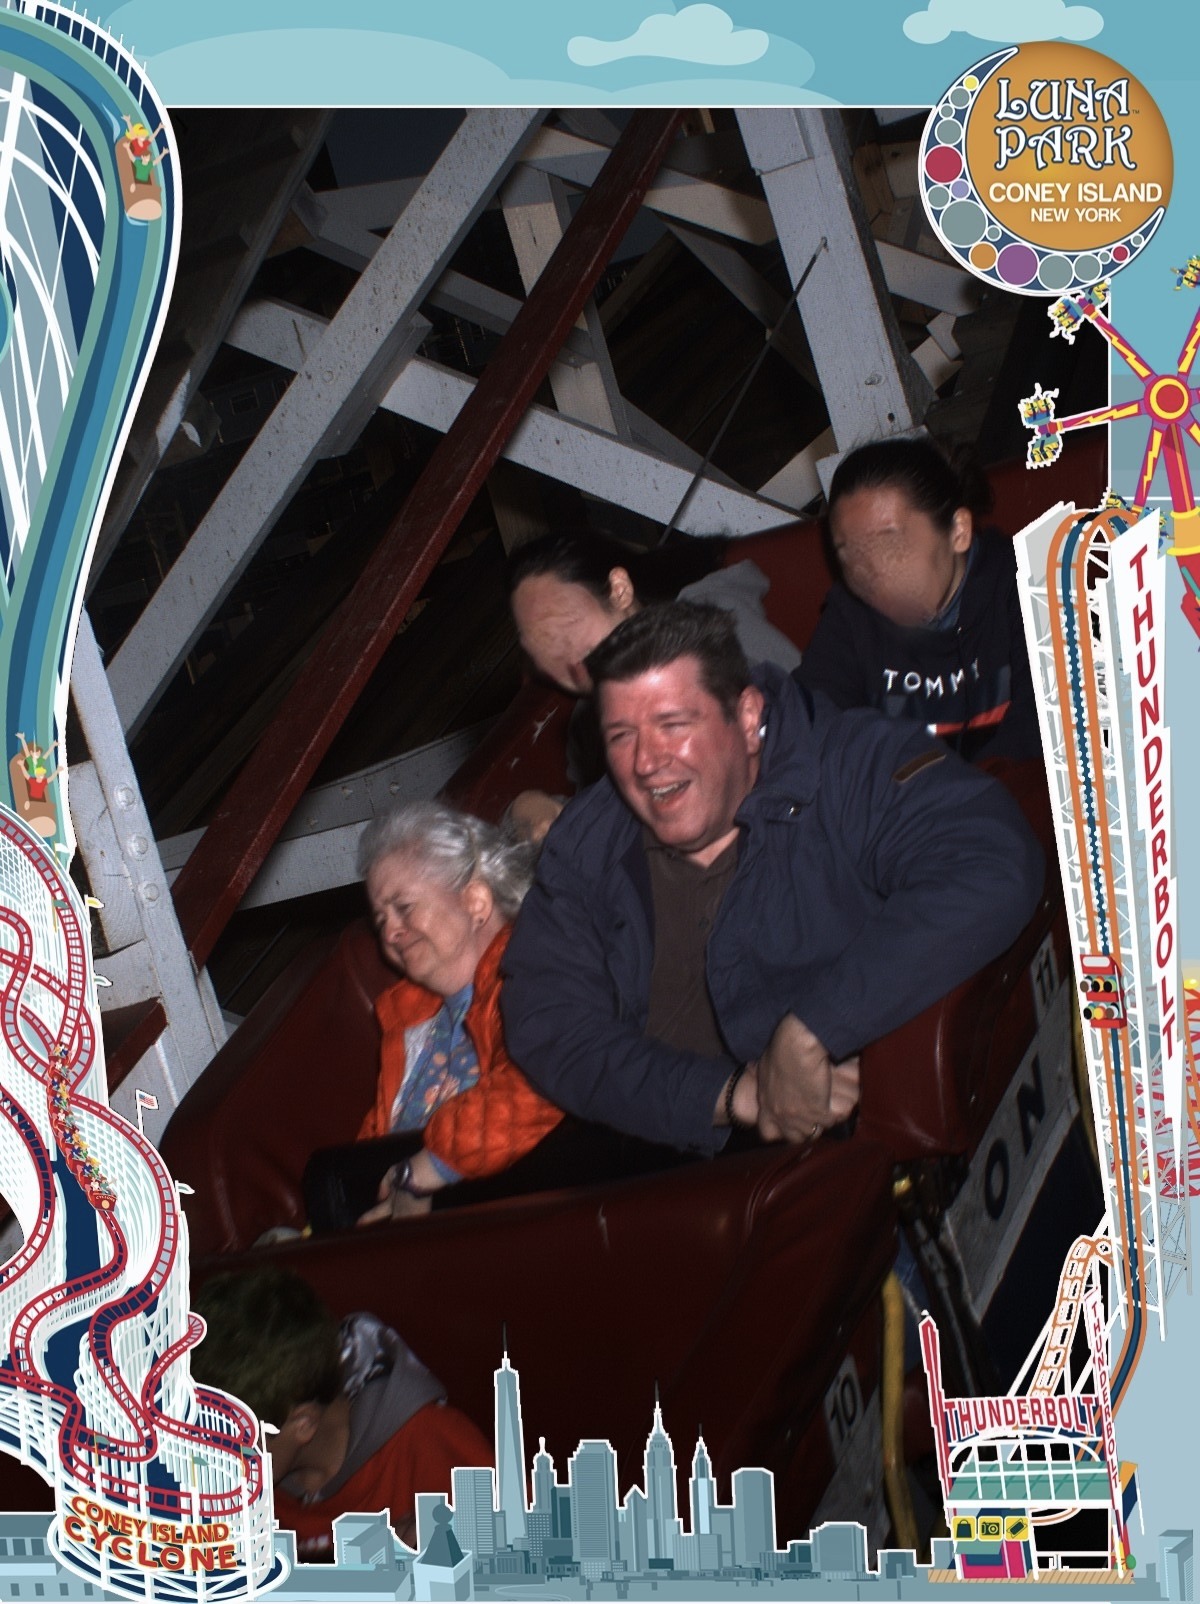 a man and woman on a roller coaster